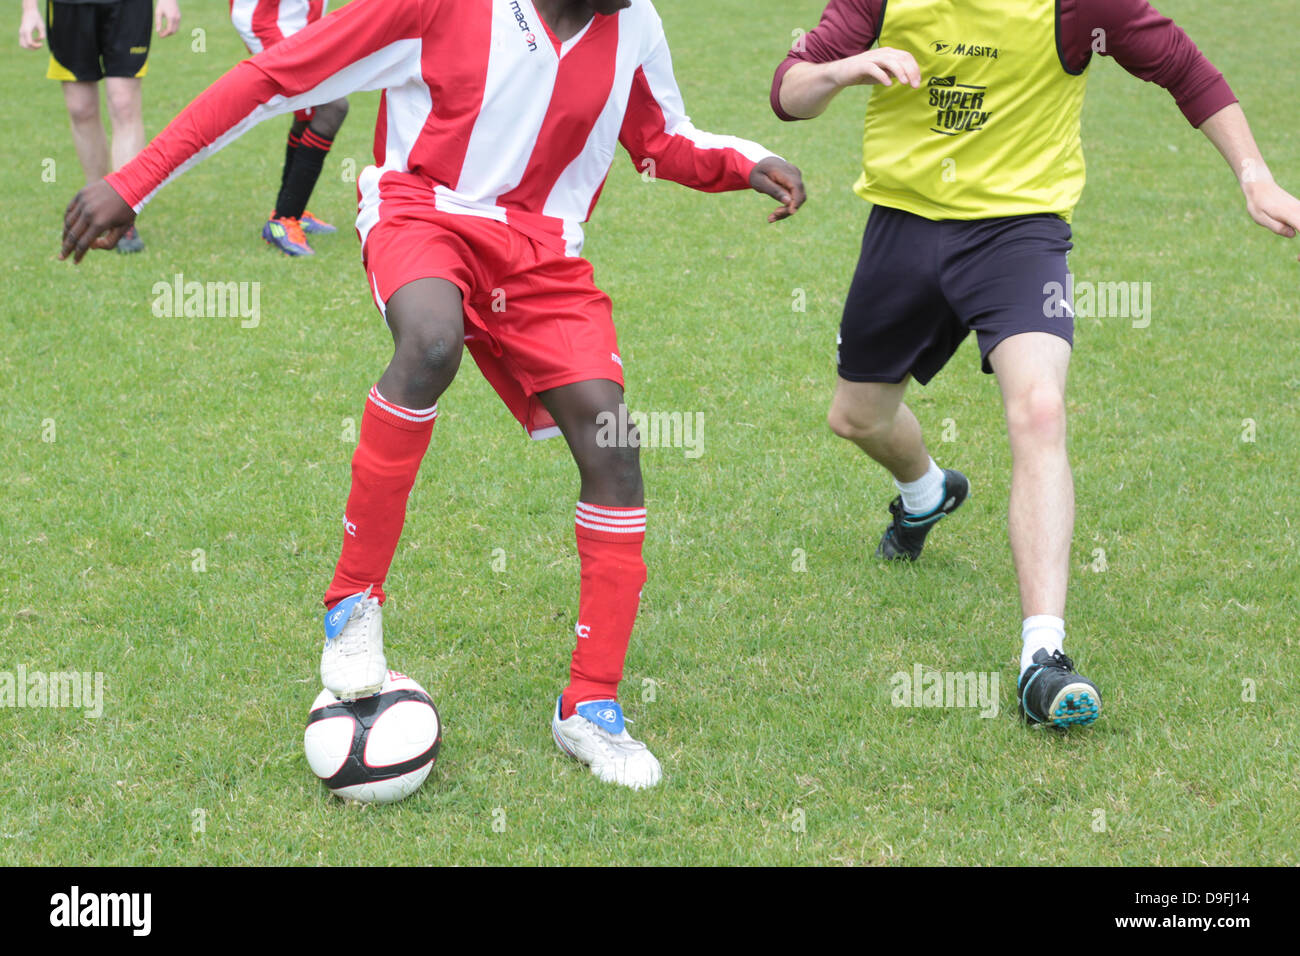 Playing football. Playing soccer. Stock Photo